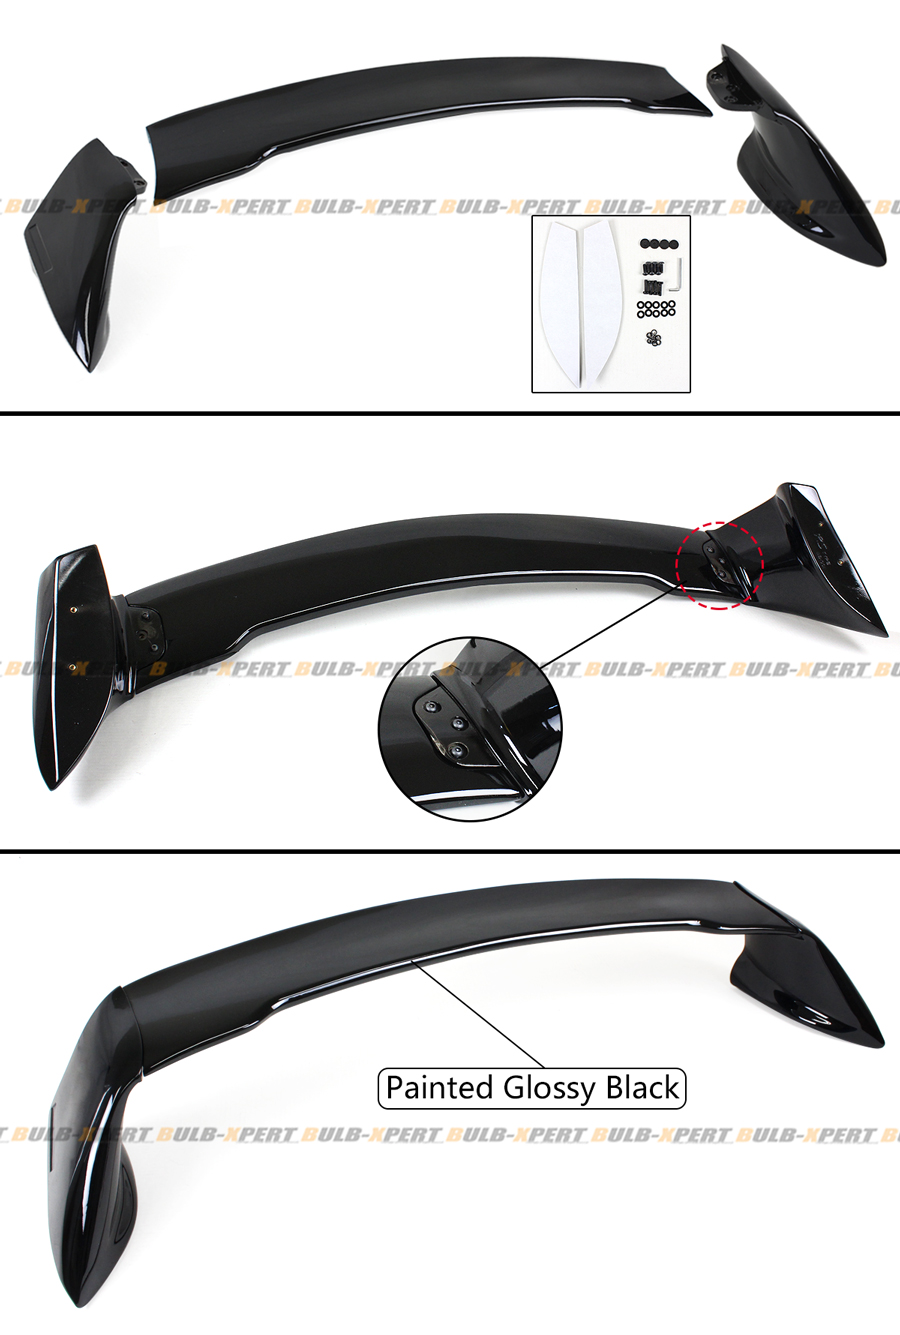 FOR 06-11 8TH GEN HONDA CIVIC 2 DOOR COUPE PAINTED BLK RR STYLE TRUNK SPOILER